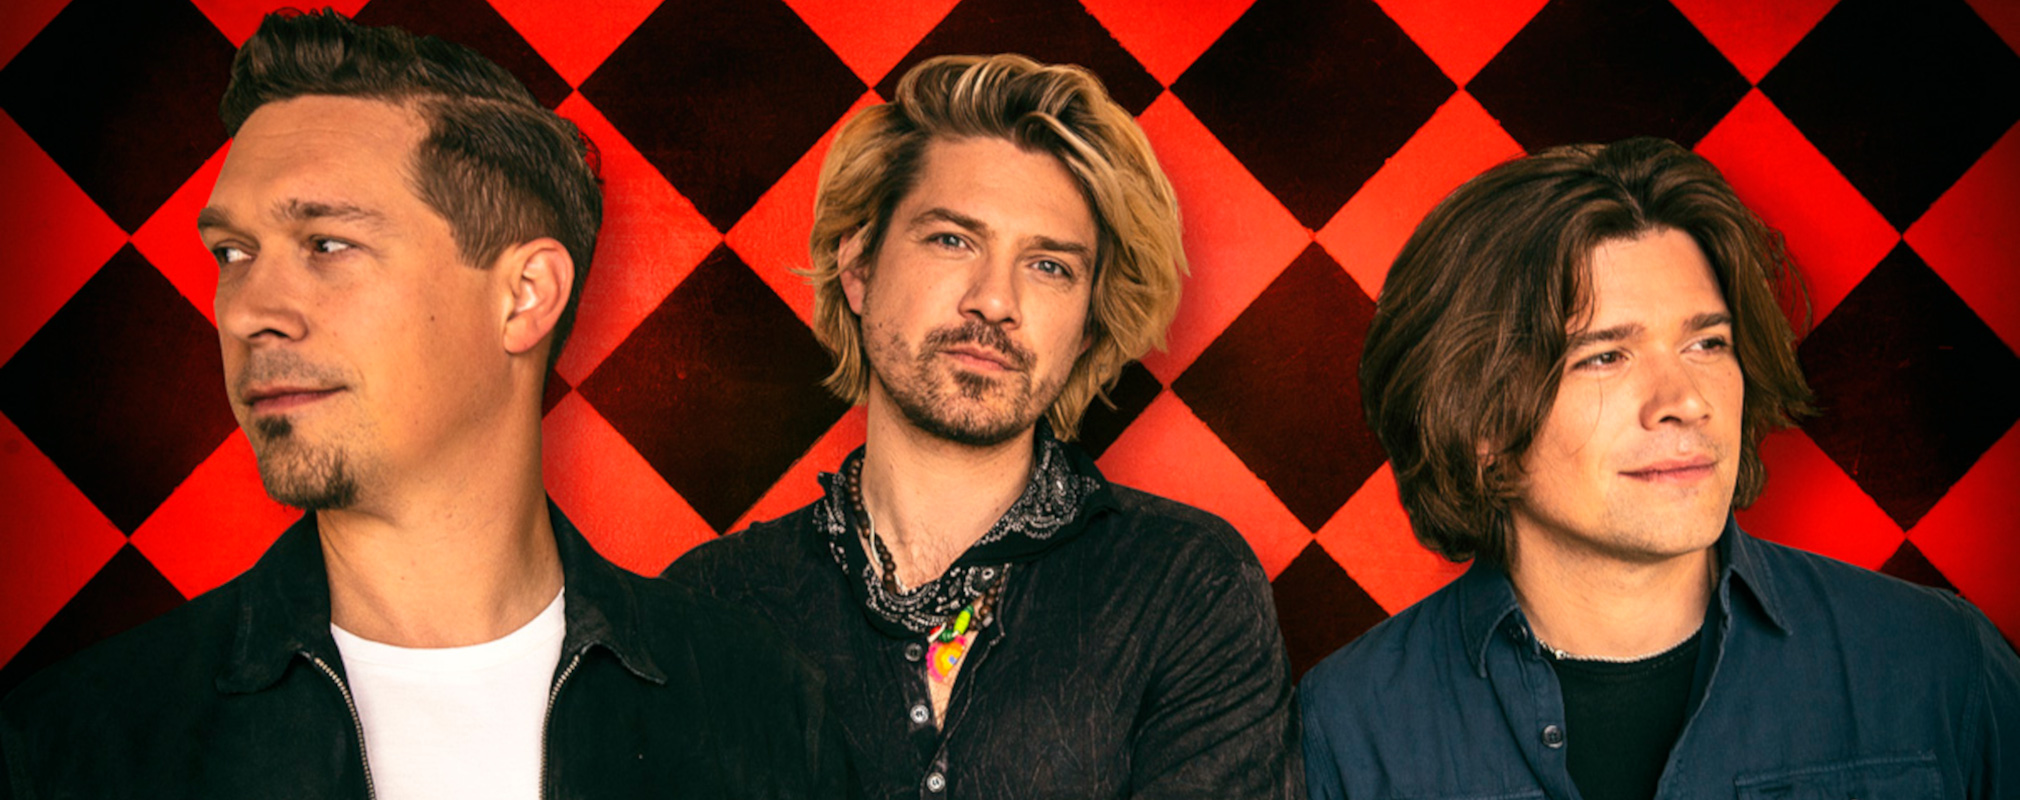 HANSON and Rick Nielsen Release New Endearing Single “Don’t Ever Change”